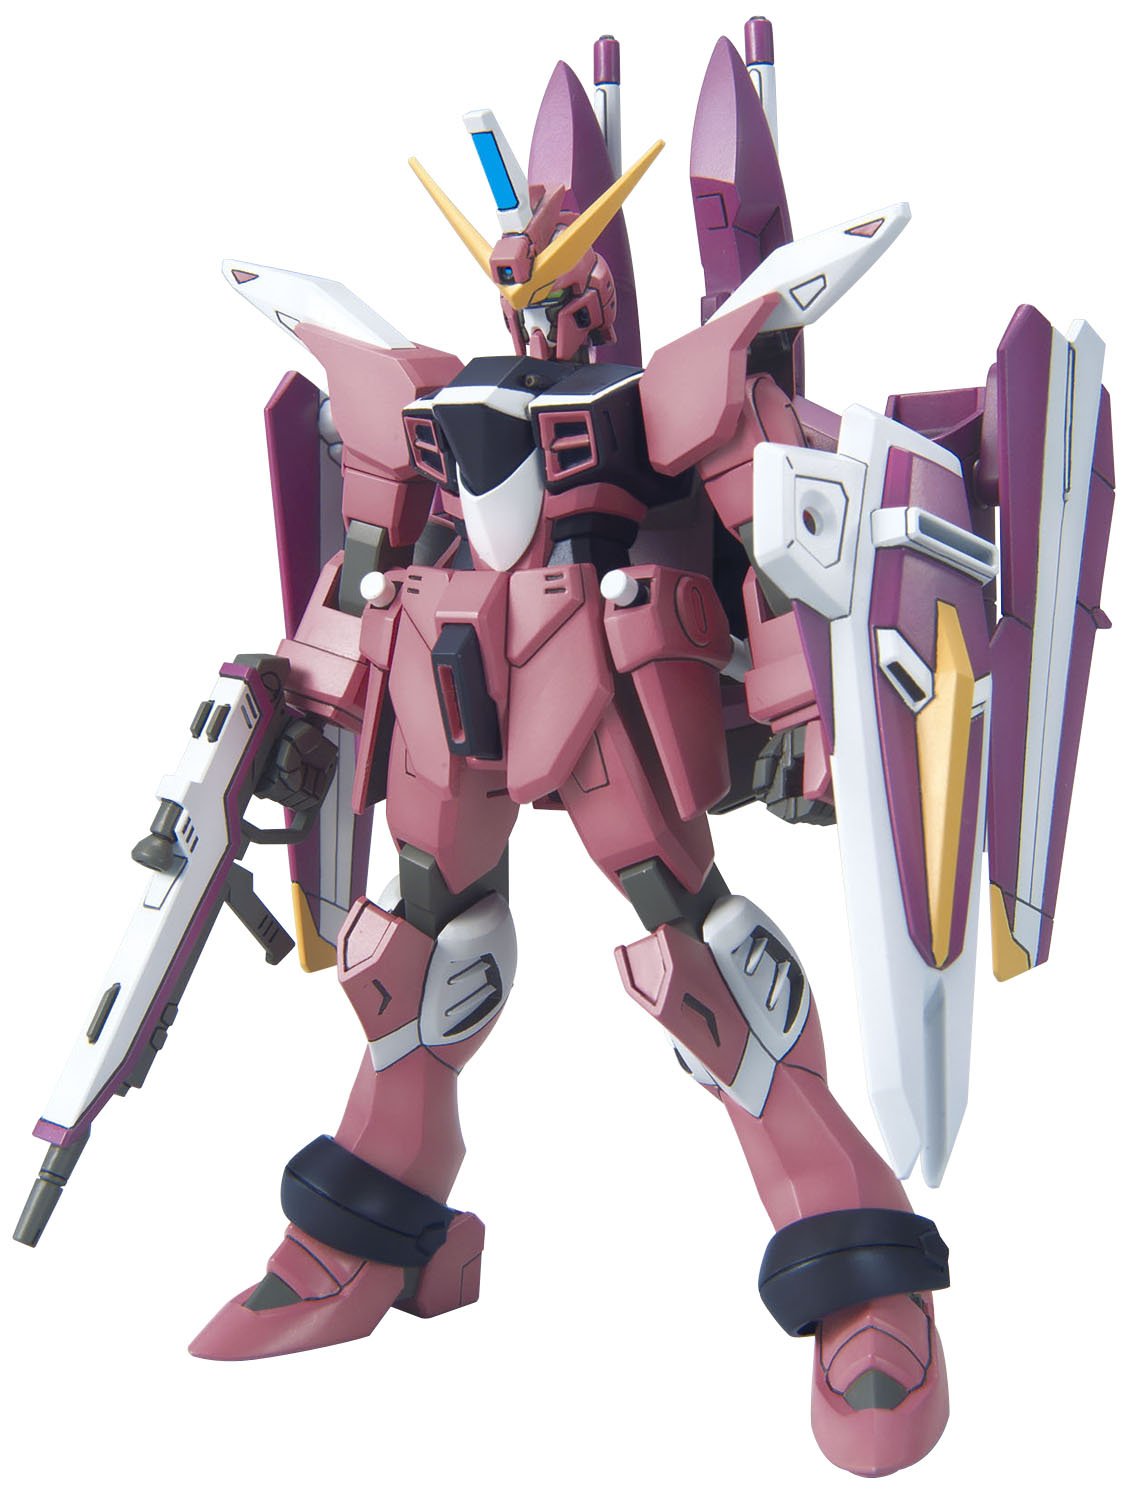 HG 1/144 R-14 ZGMF-X09A Justice Gundam: Box Art, Official Images